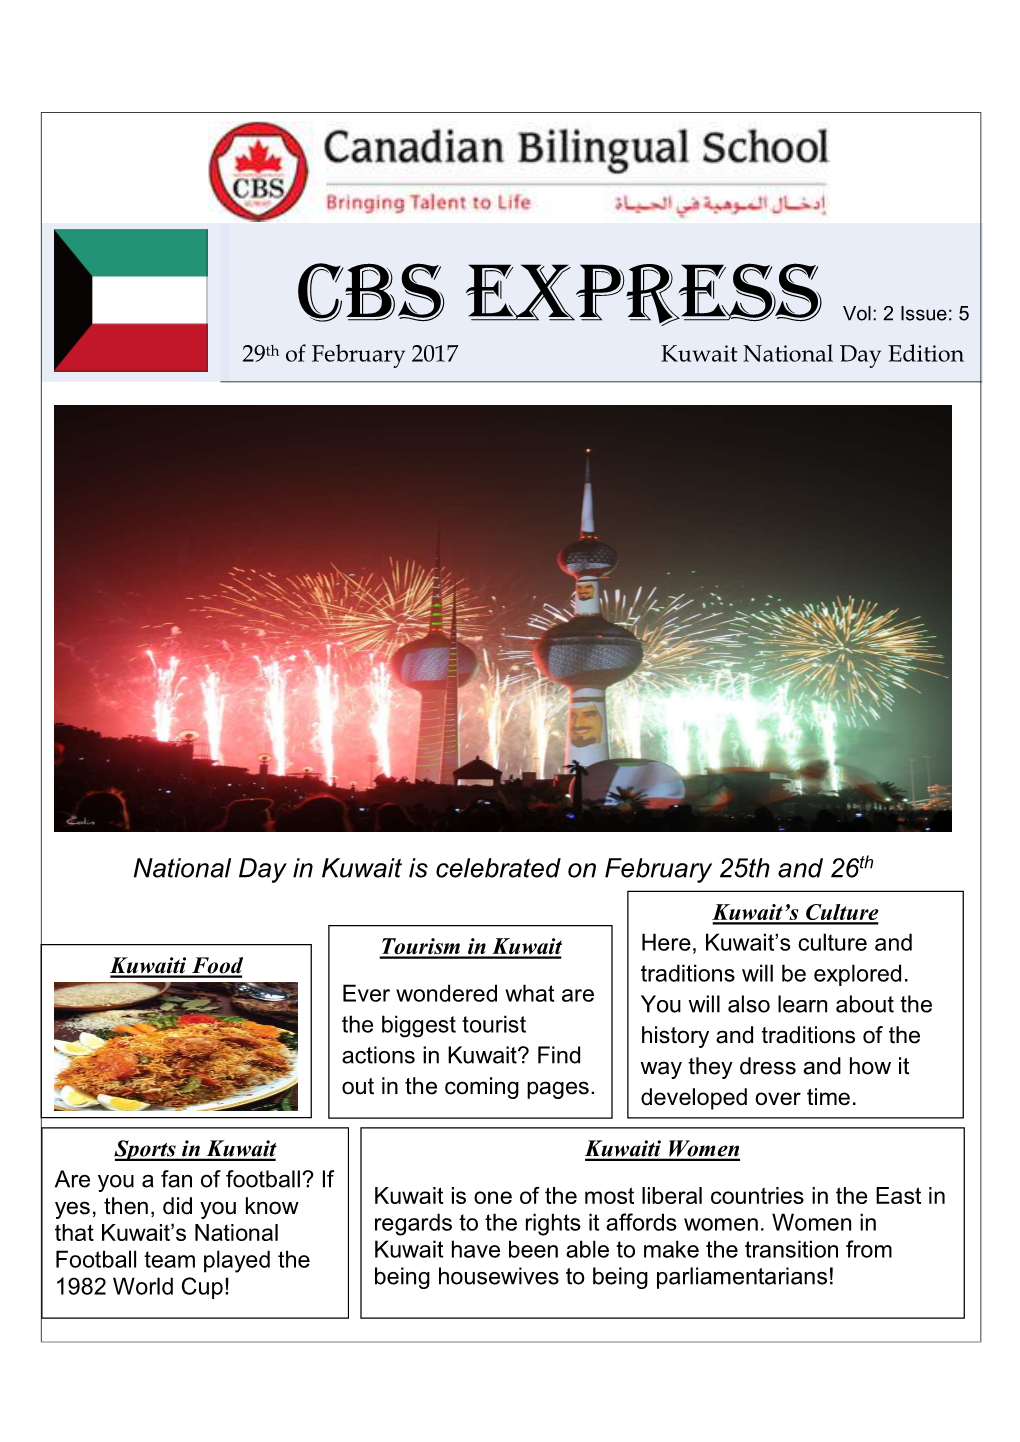 National Day in Kuwait Is Celebrated on February 25Th and 26Th